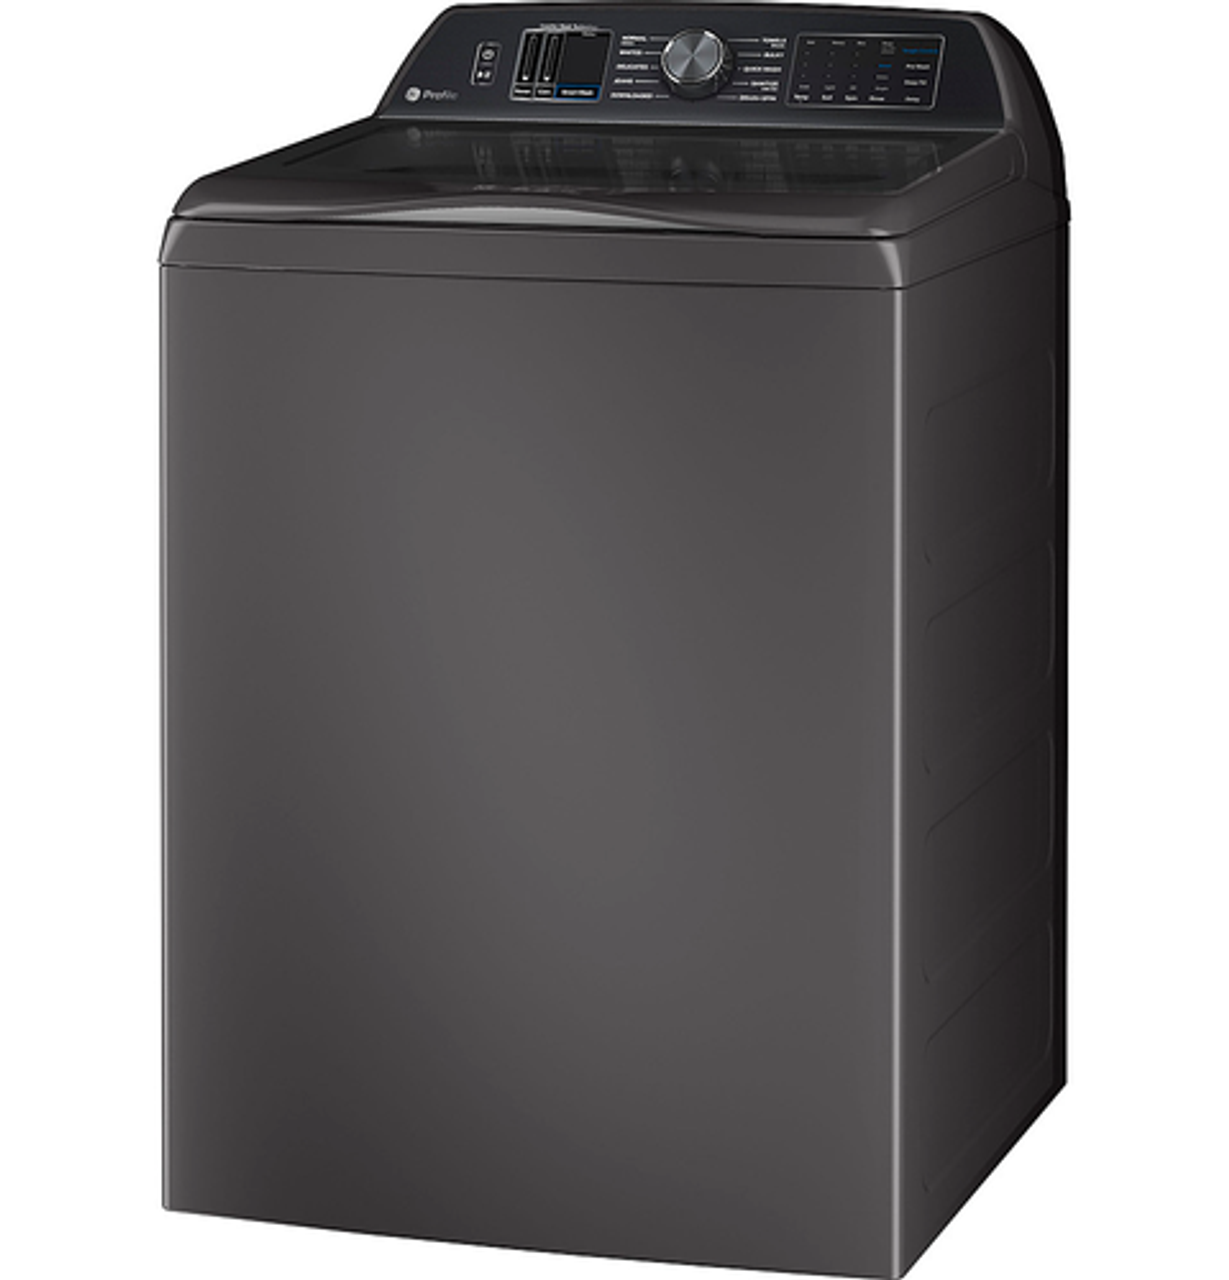 GE Profile 5.4  cu. ft. Capacity Washer with Smarter Wash Technology and FlexDispense - Diamond gray